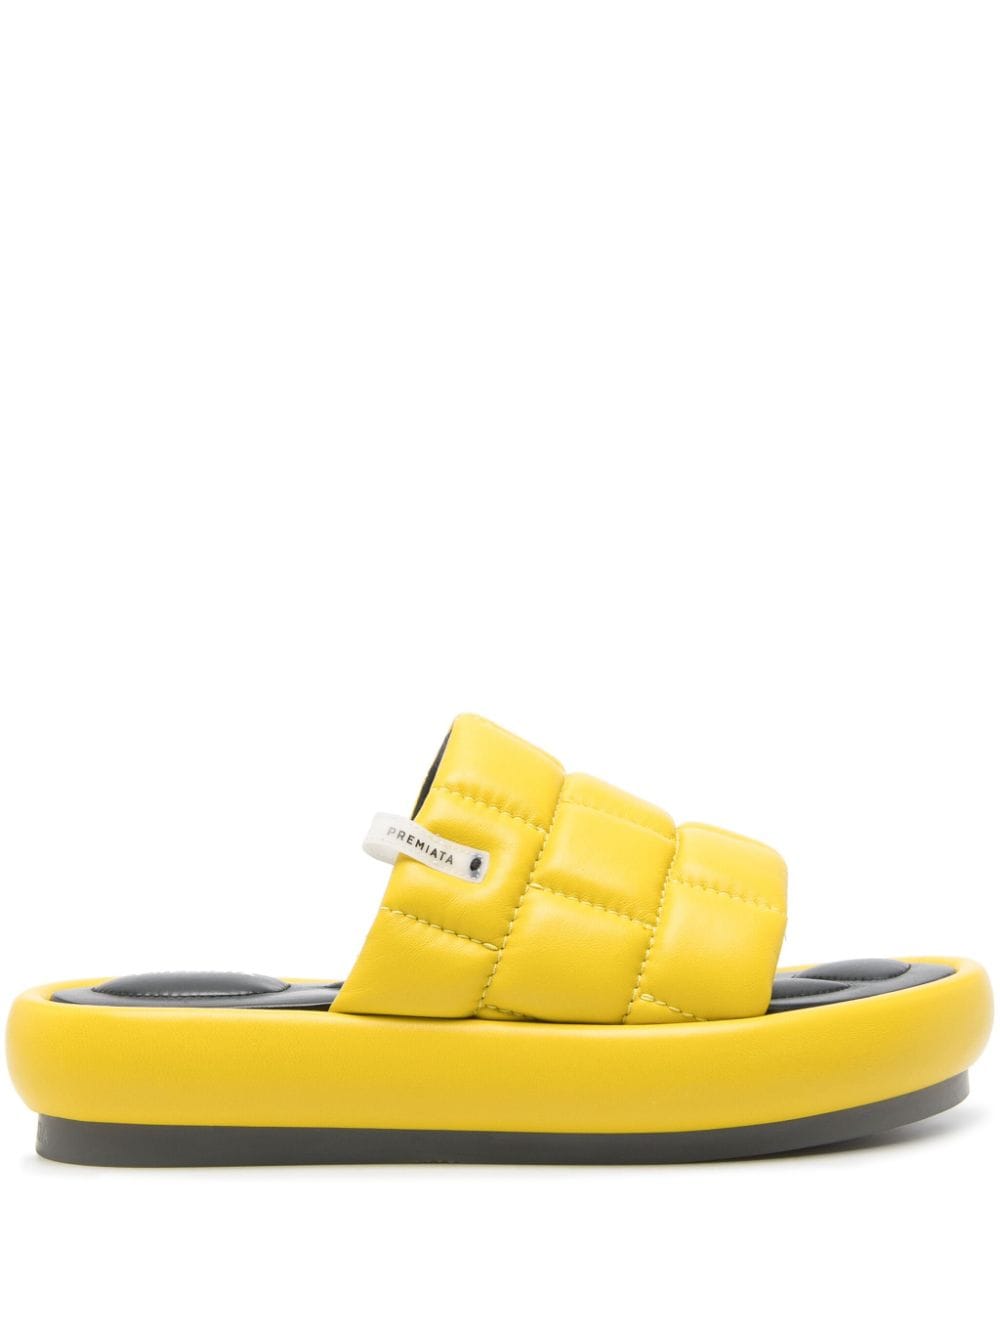 Premiata quilted leather slides Yellow